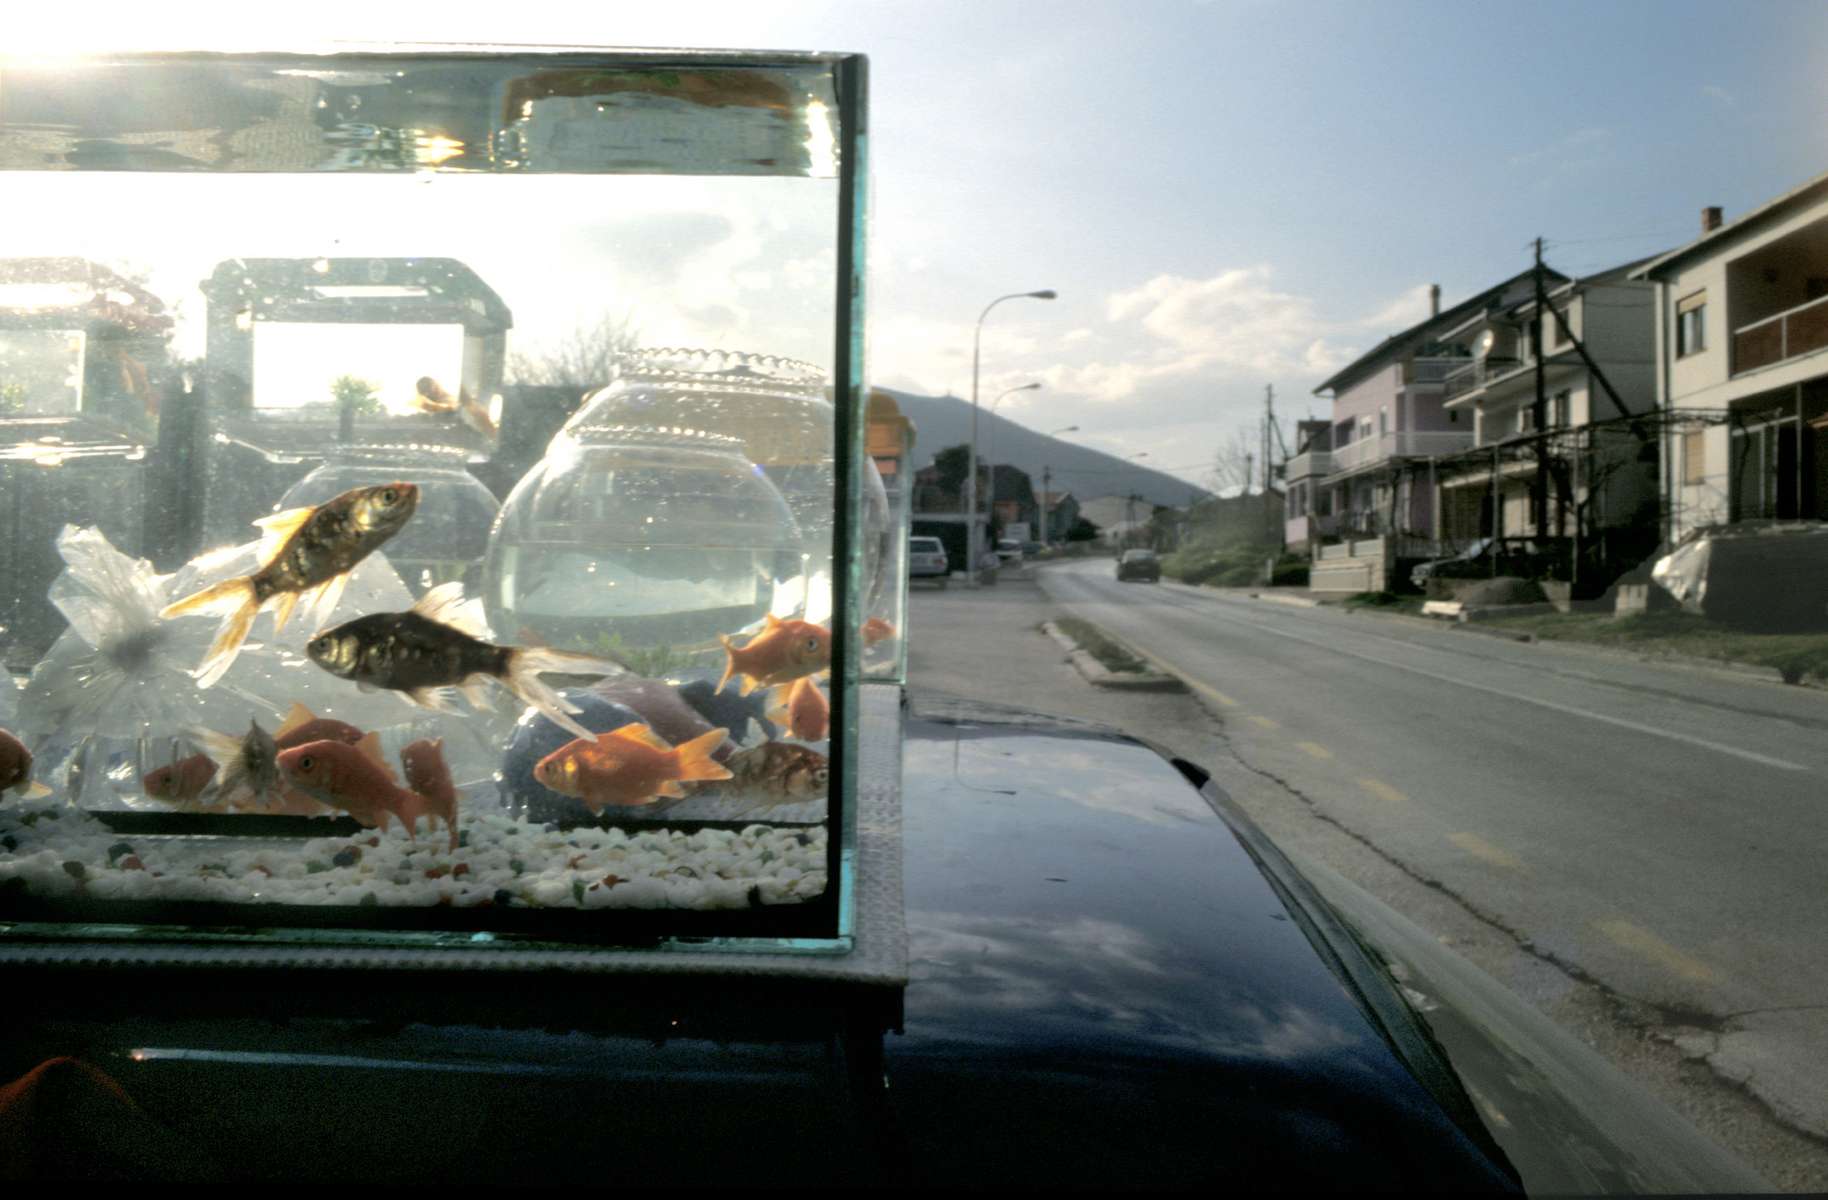 A roadside vendor, hoping to attract passing drivers, offers goldfish for sale.